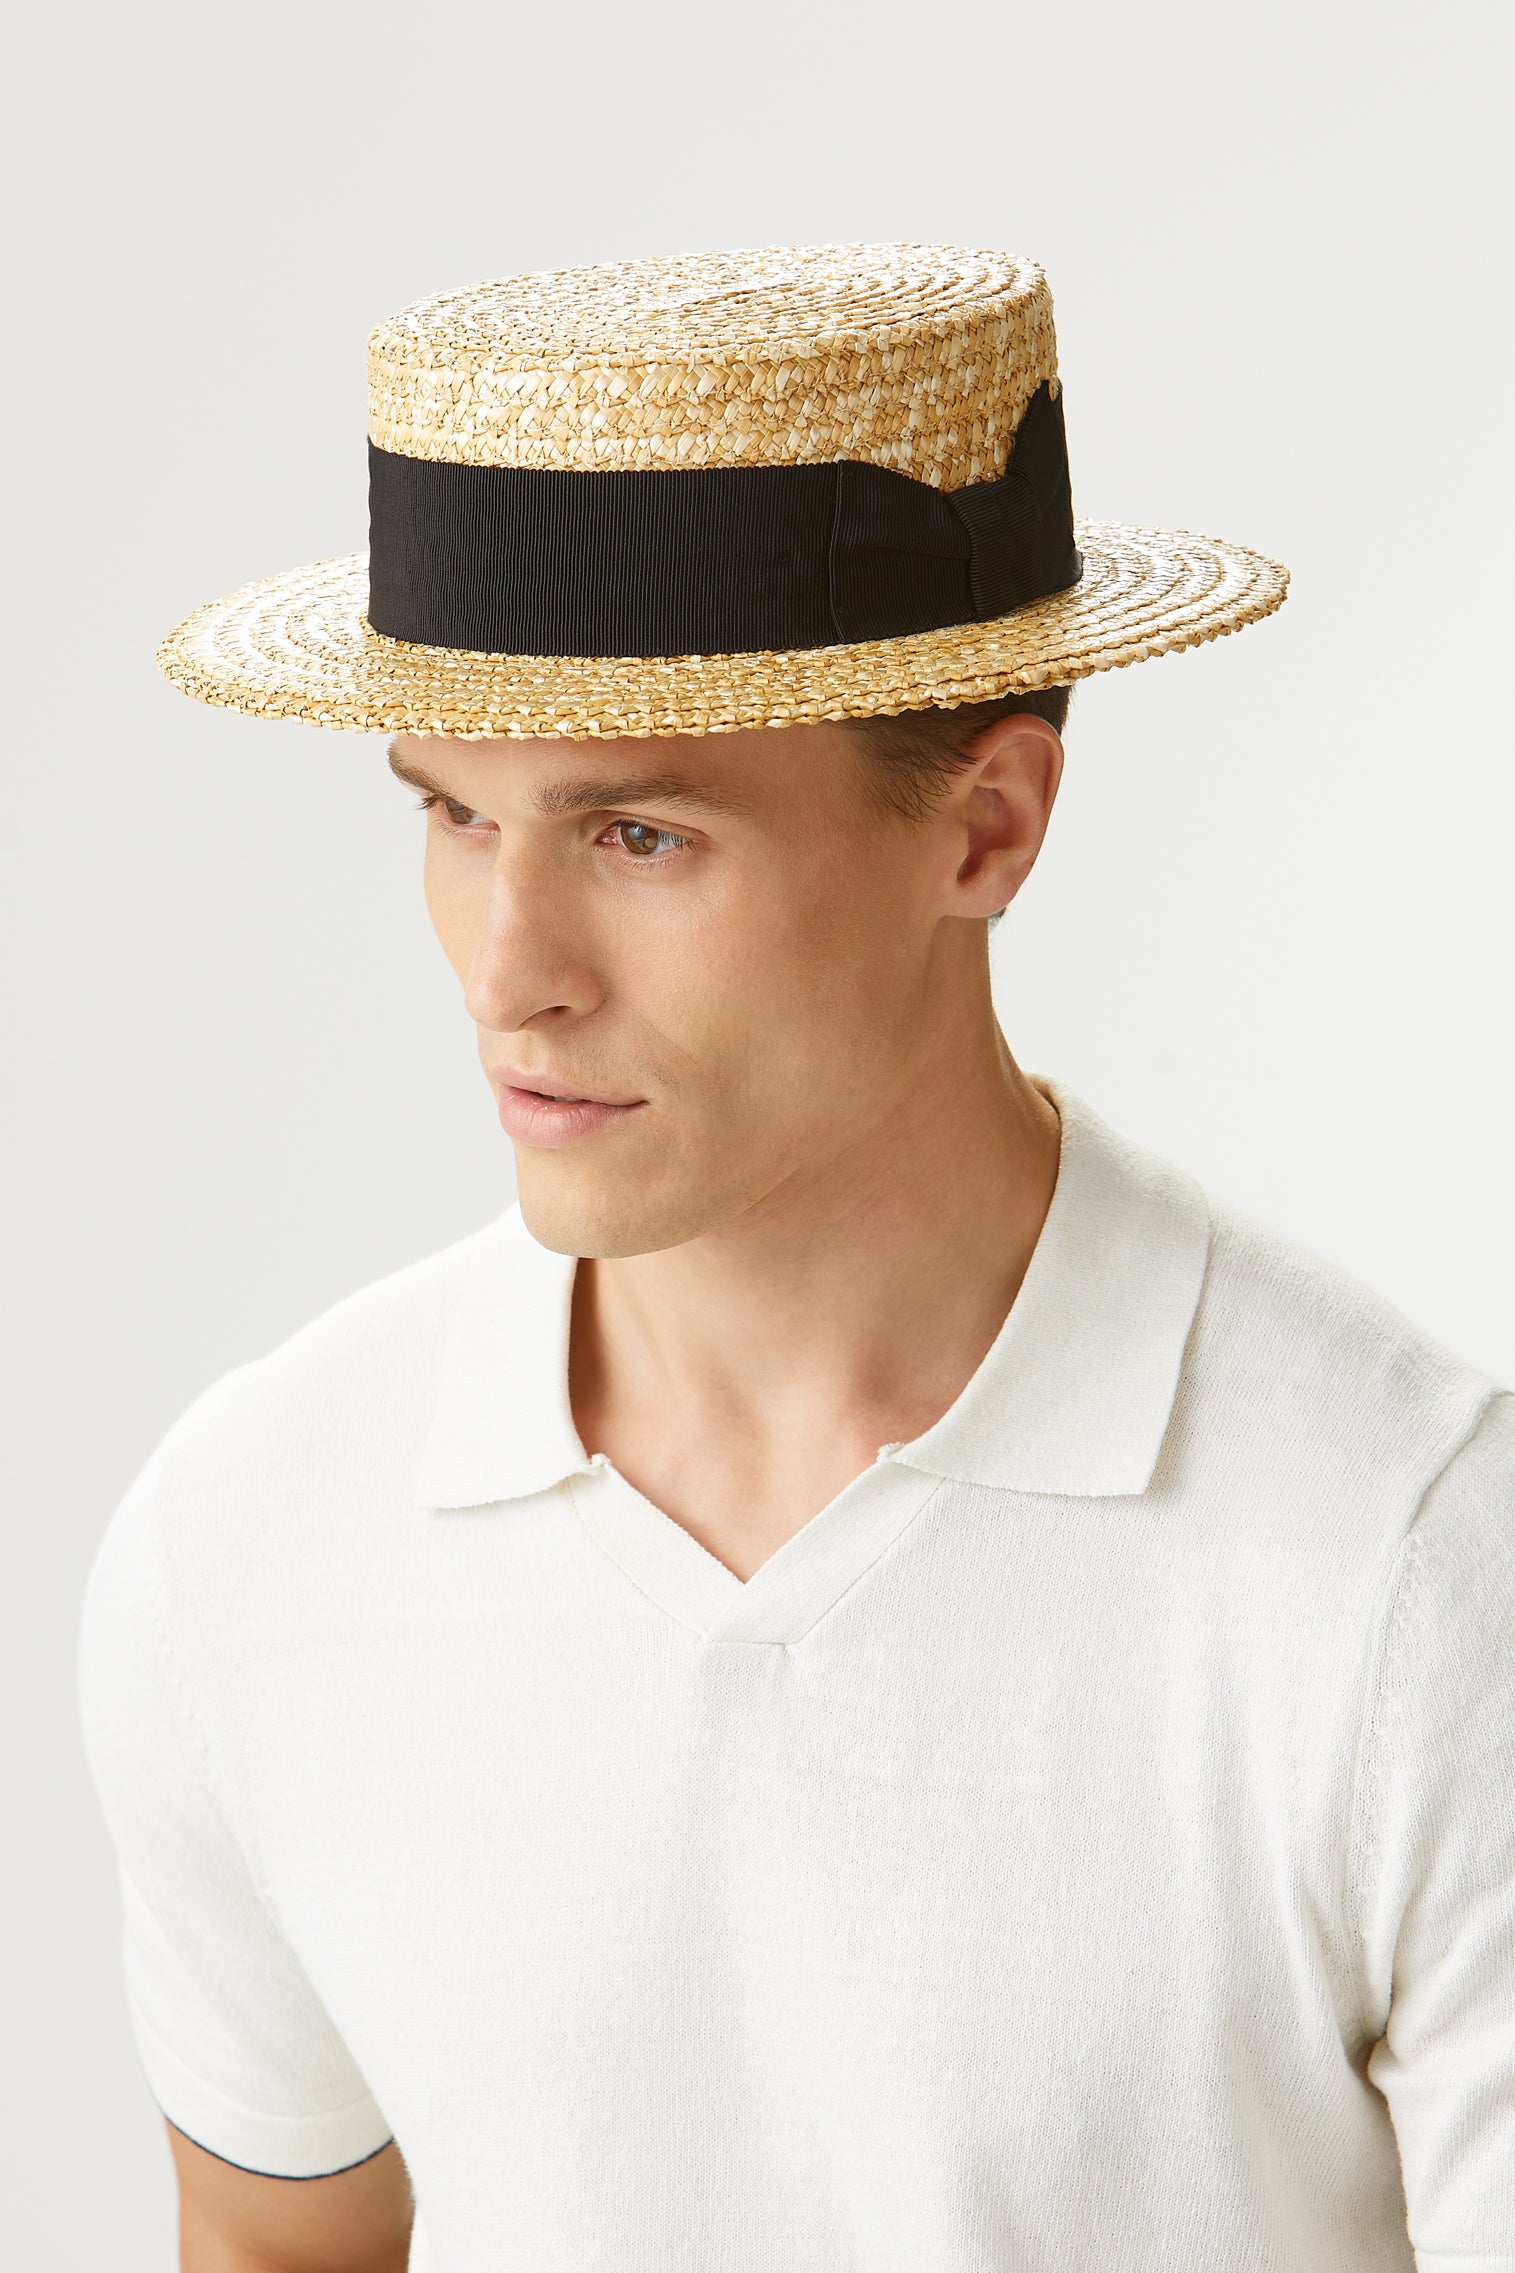 Classic Boater - Panamas, Straw and Sun Hats for Men - Lock & Co. Hatters London UK